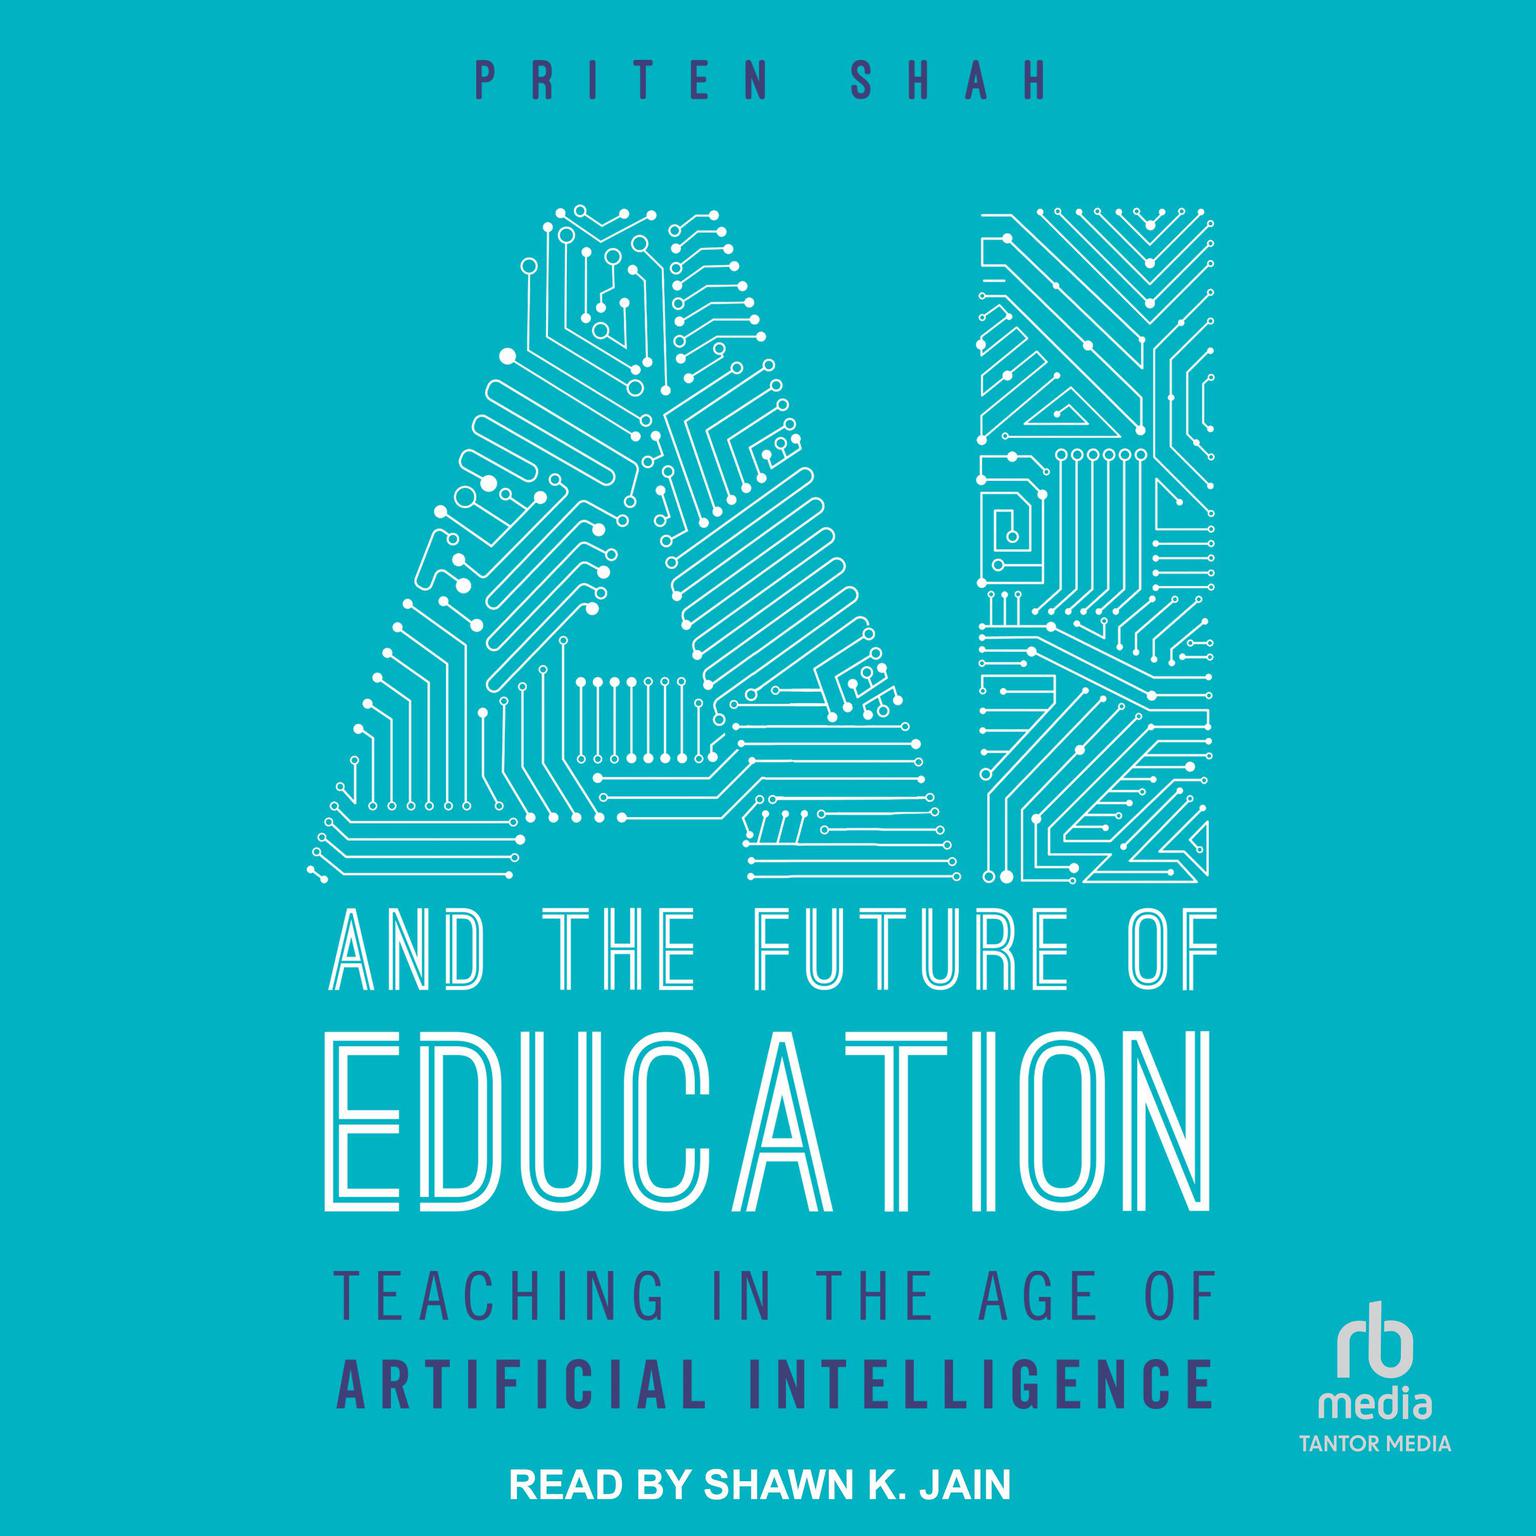 AI And The Future of Education: Teaching in the age of Artificial Intelligence Audiobook, by Priten Shah